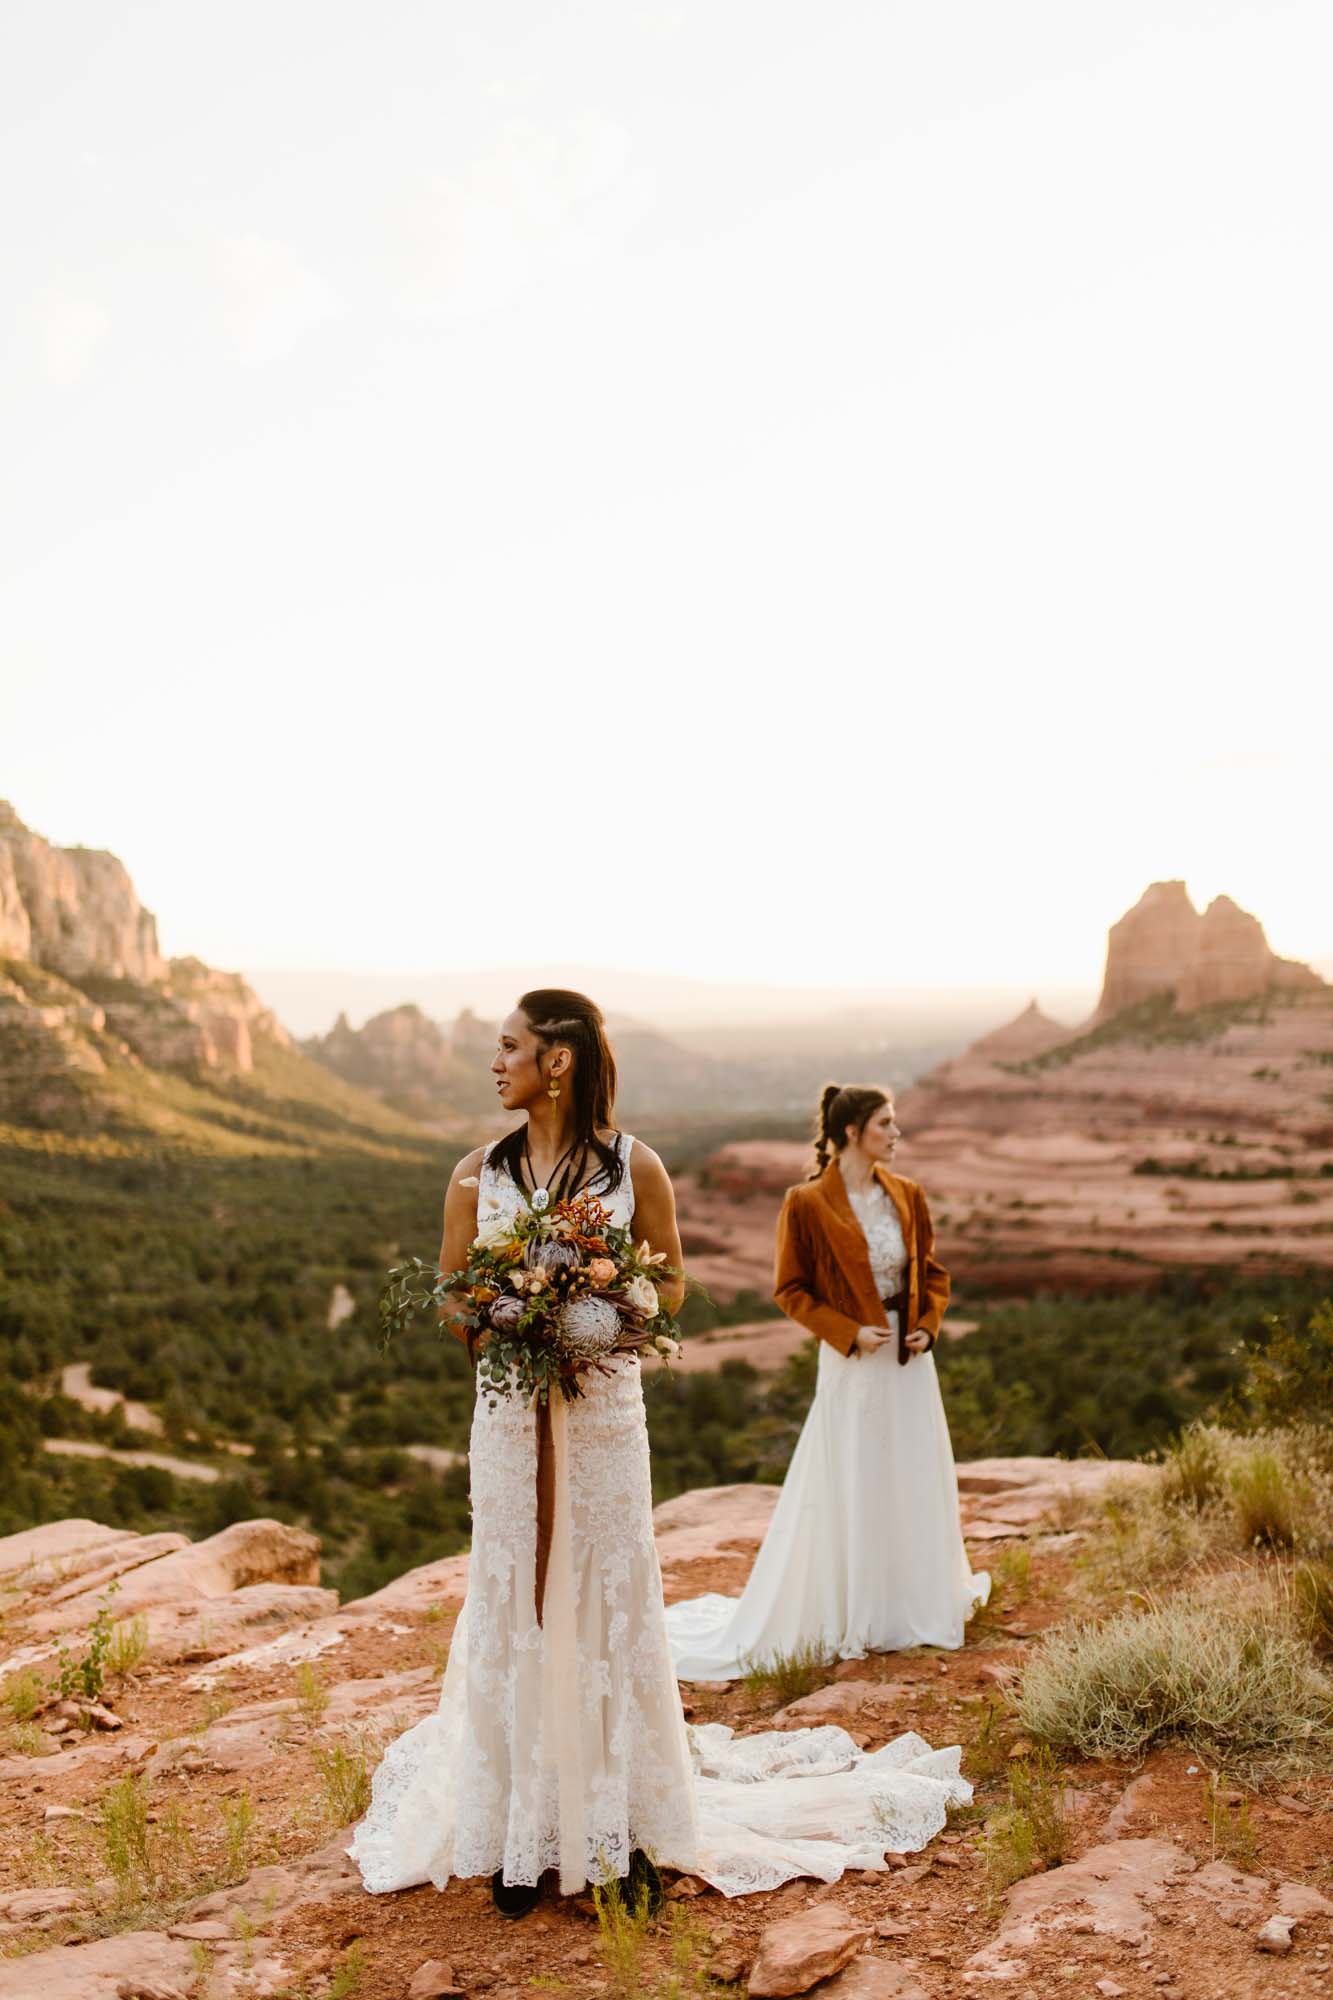 Southwestern-themed elopement inspiration in Sedona | From the Fountain | Featured on Equally Wed, the leading LGBTQ+ wedding magazine